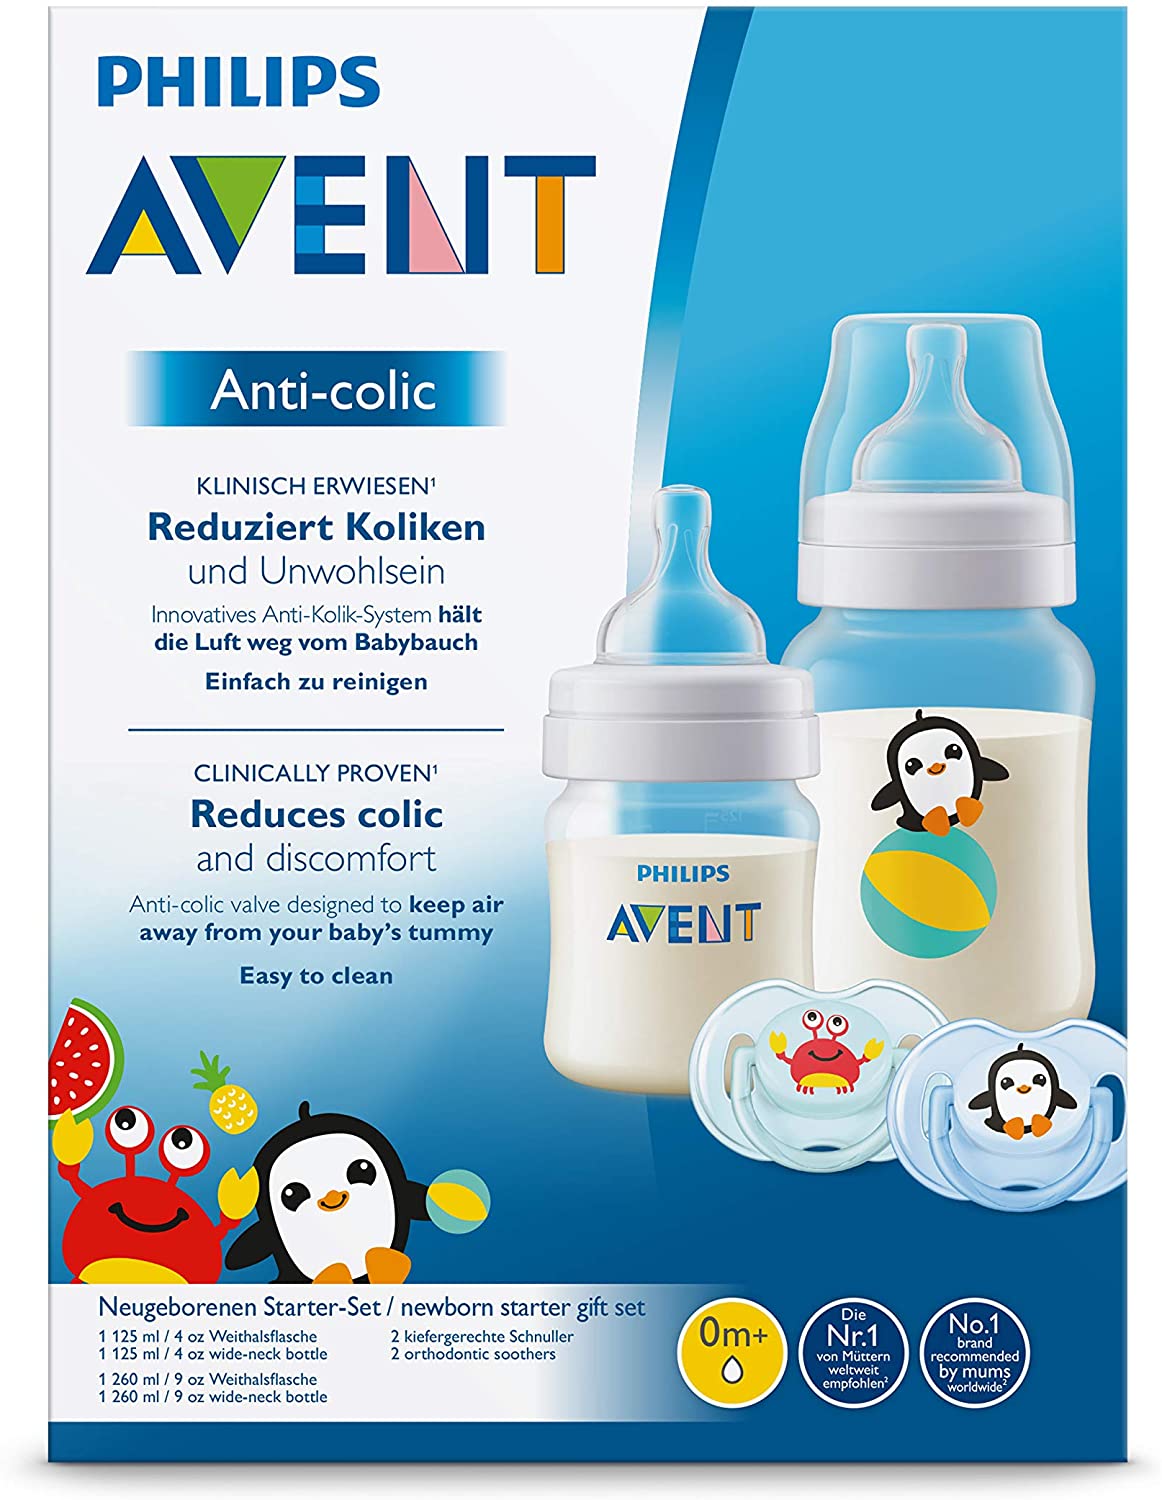 Philips AVENT Airfree Vent Anti Cólicas - Kit Mamadeiras e Chupetas Bestseller Anne Claire Baby Store 